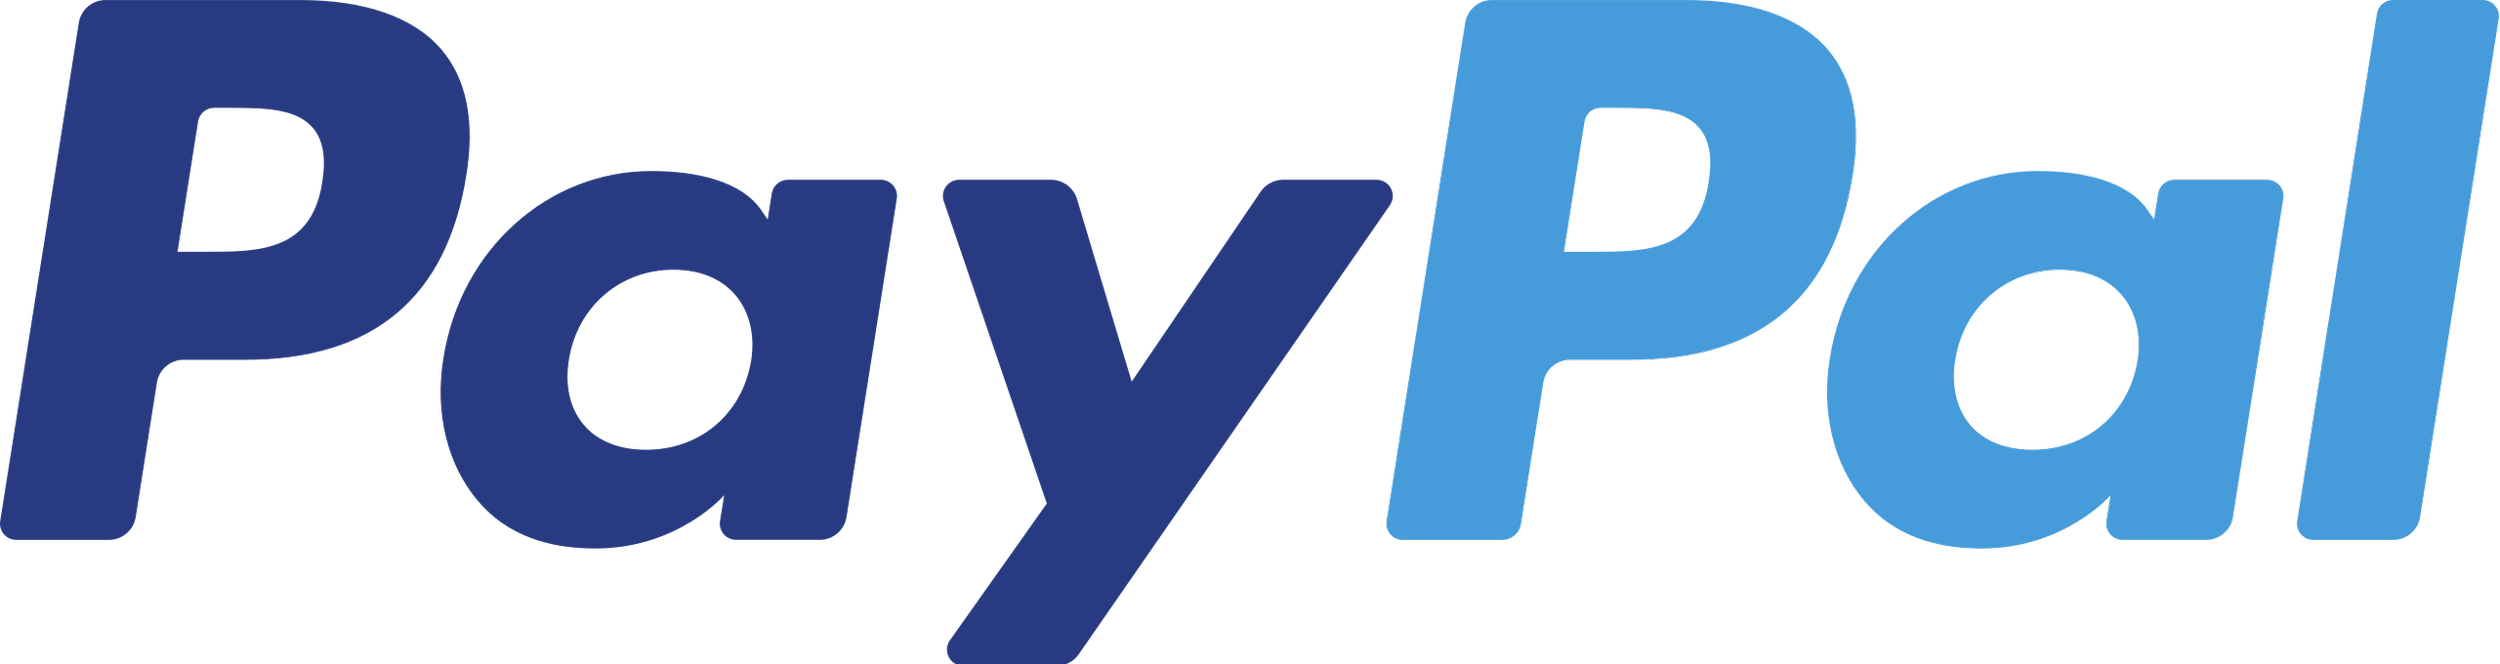 2560px-PayPal_logo.svg.png